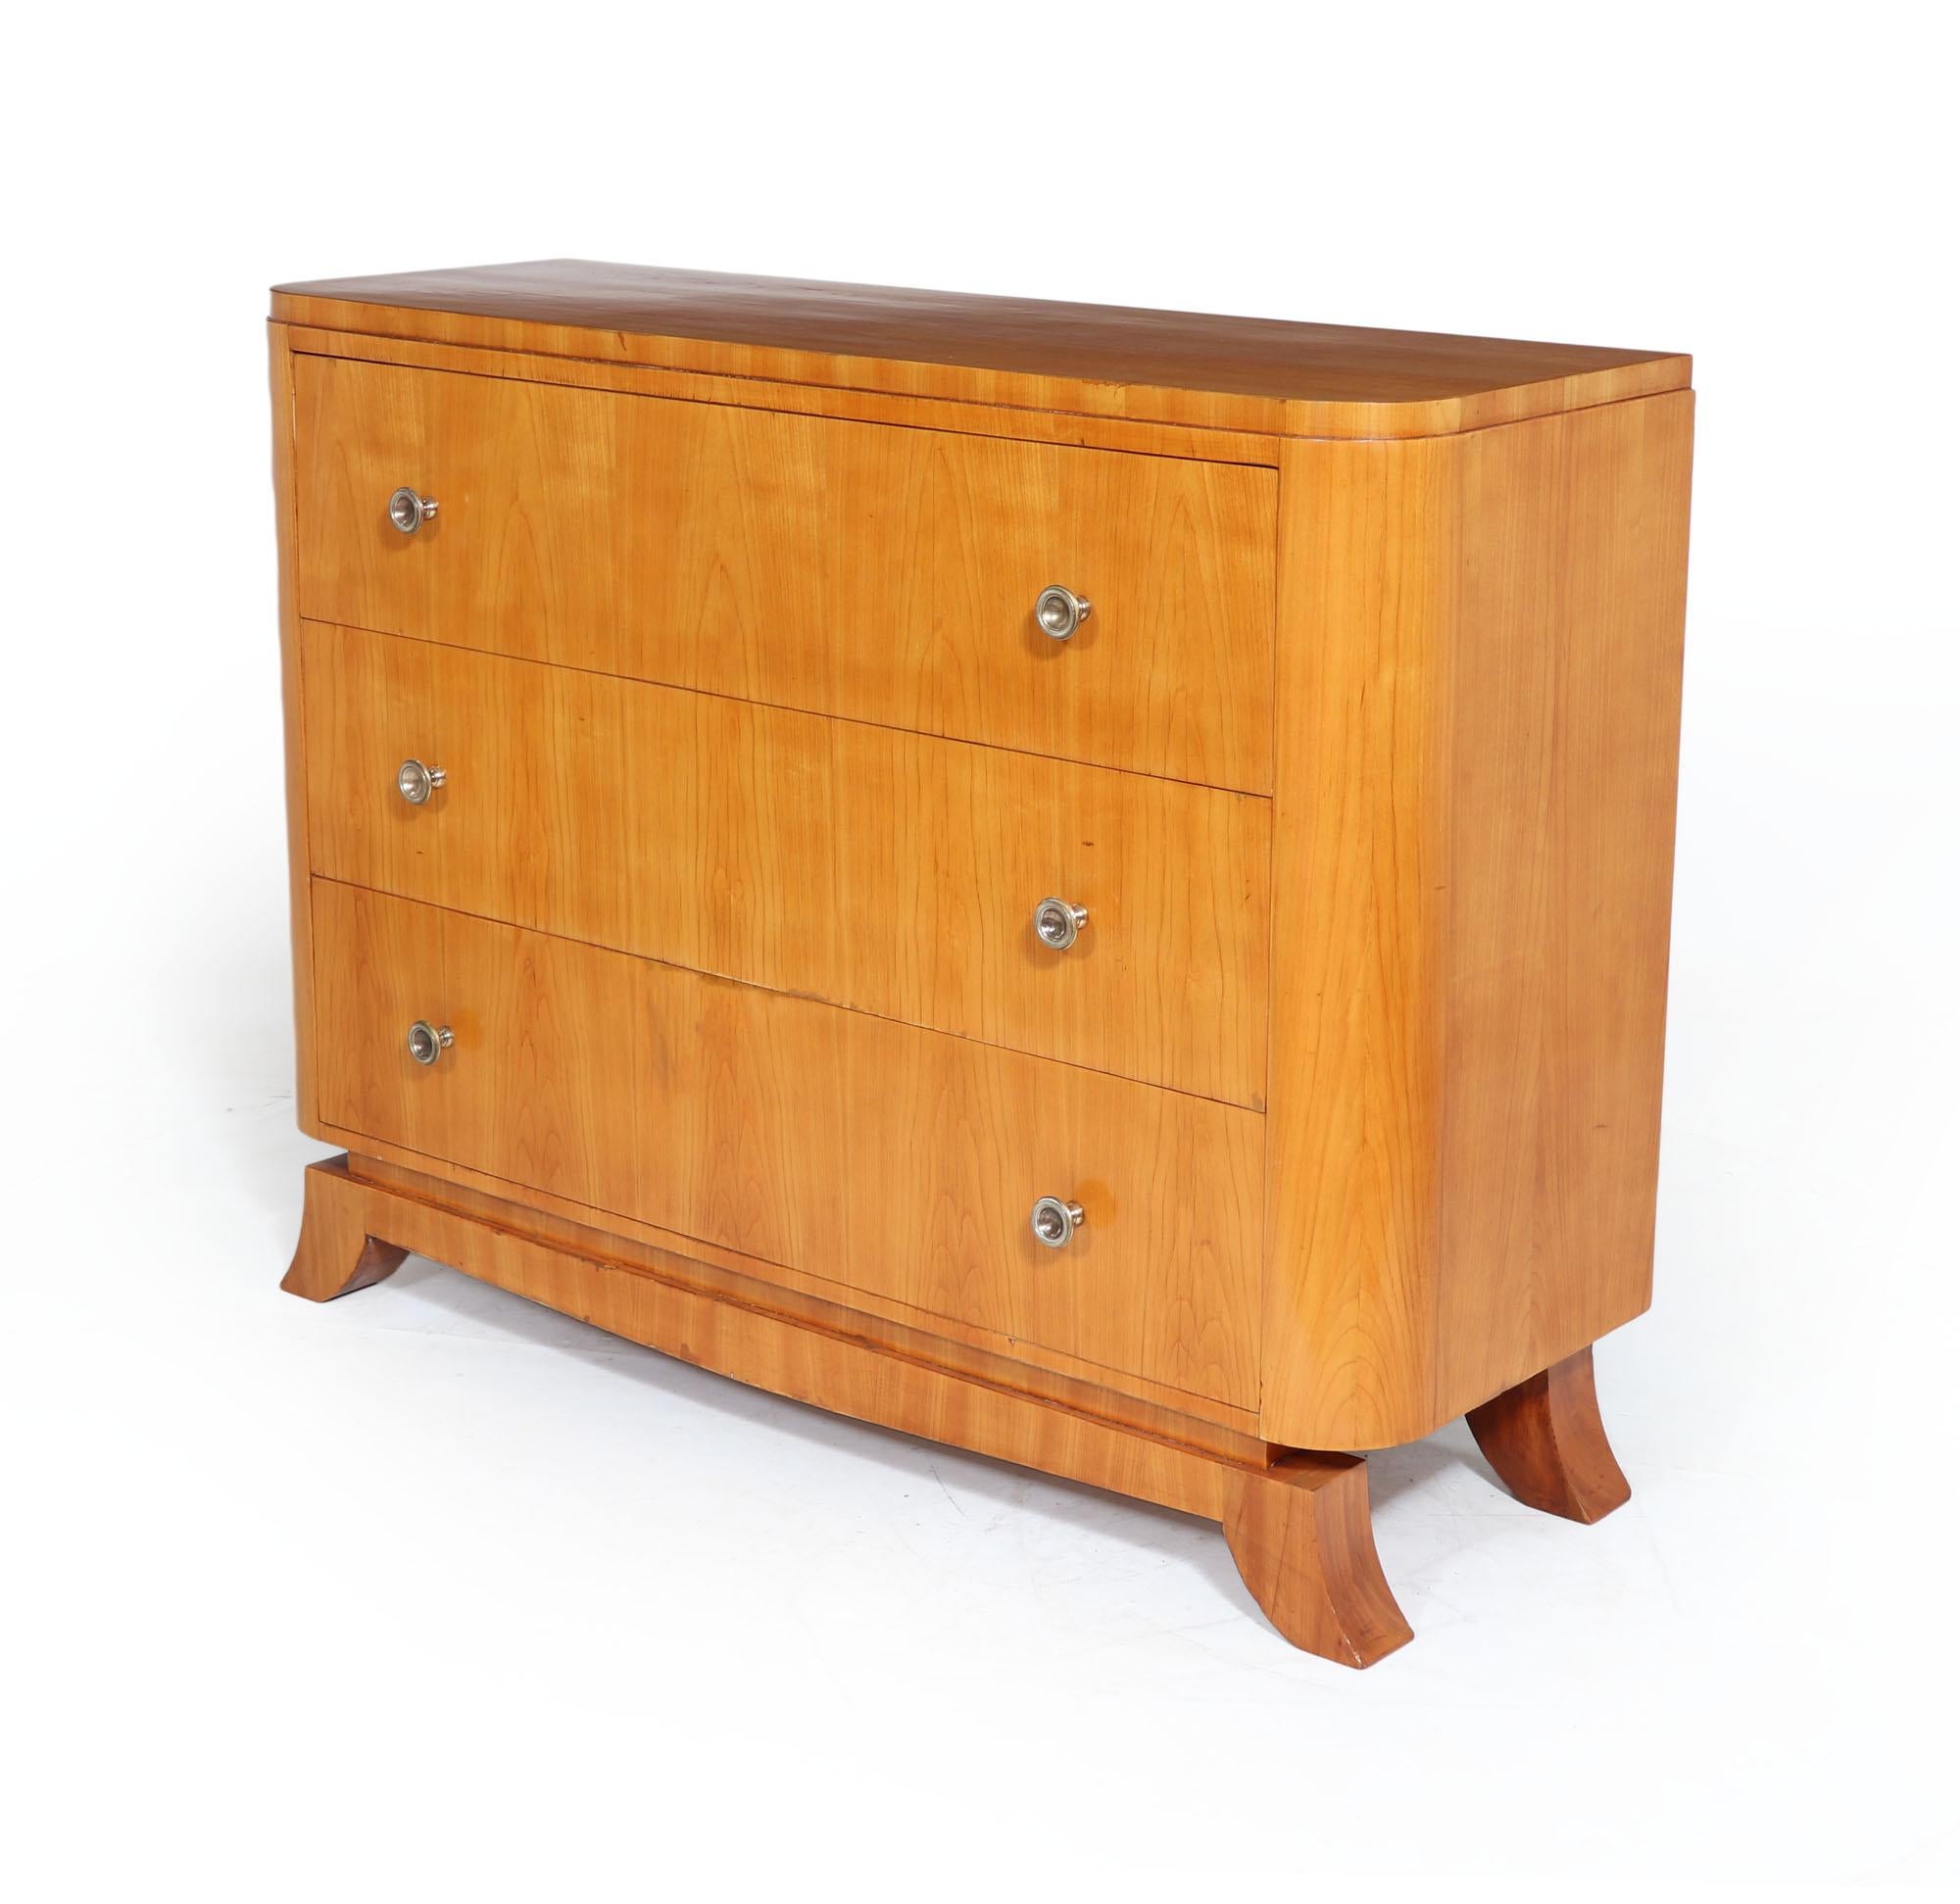 Mid-20th Century Art Deco Chest of Drawers in Cherry